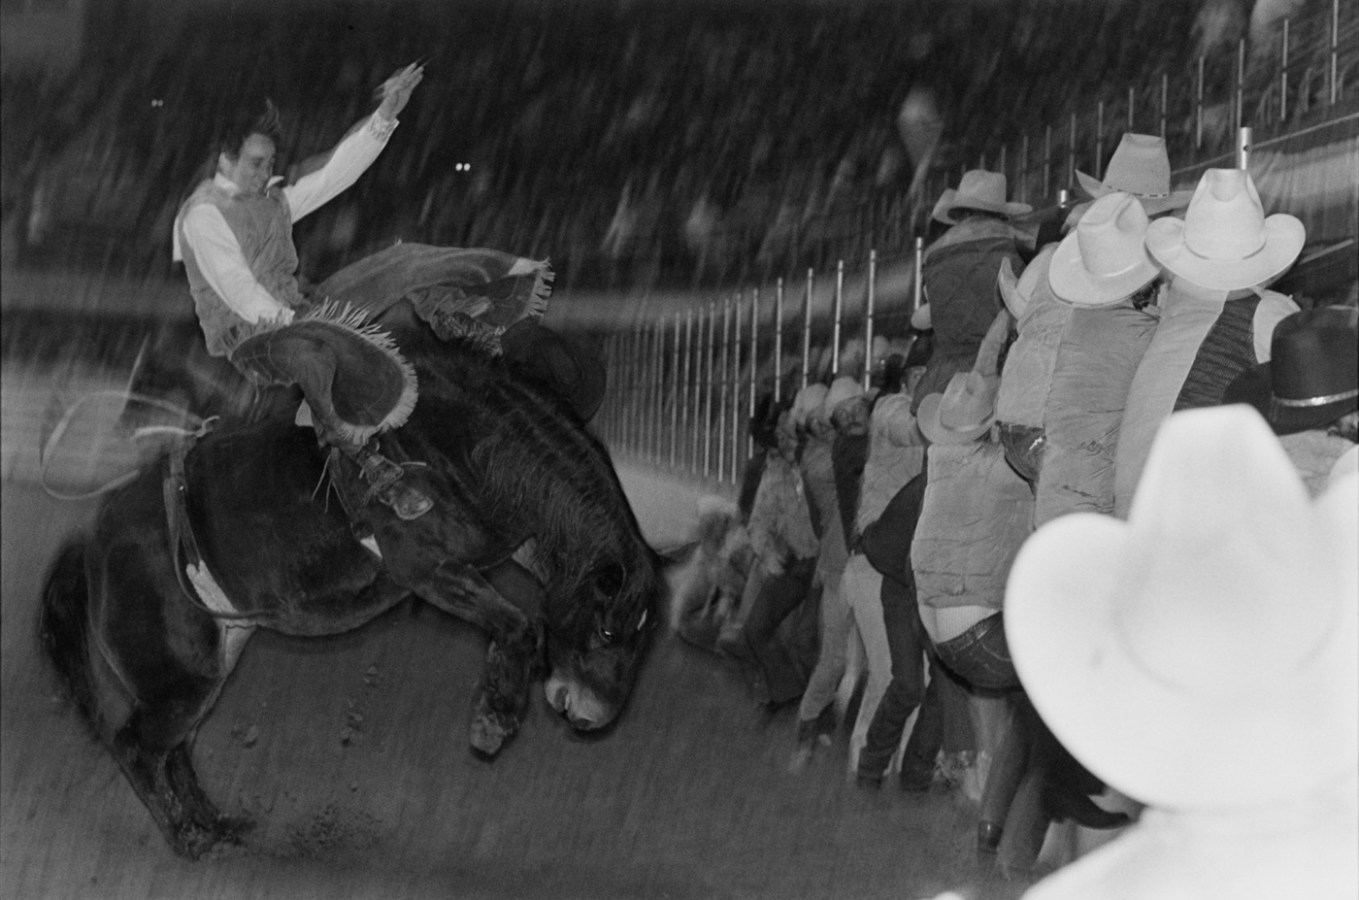 Black-and-white photograph of a cowboy on a bucking horse next to a crowd of people in cowboy hats climbing out of the arena